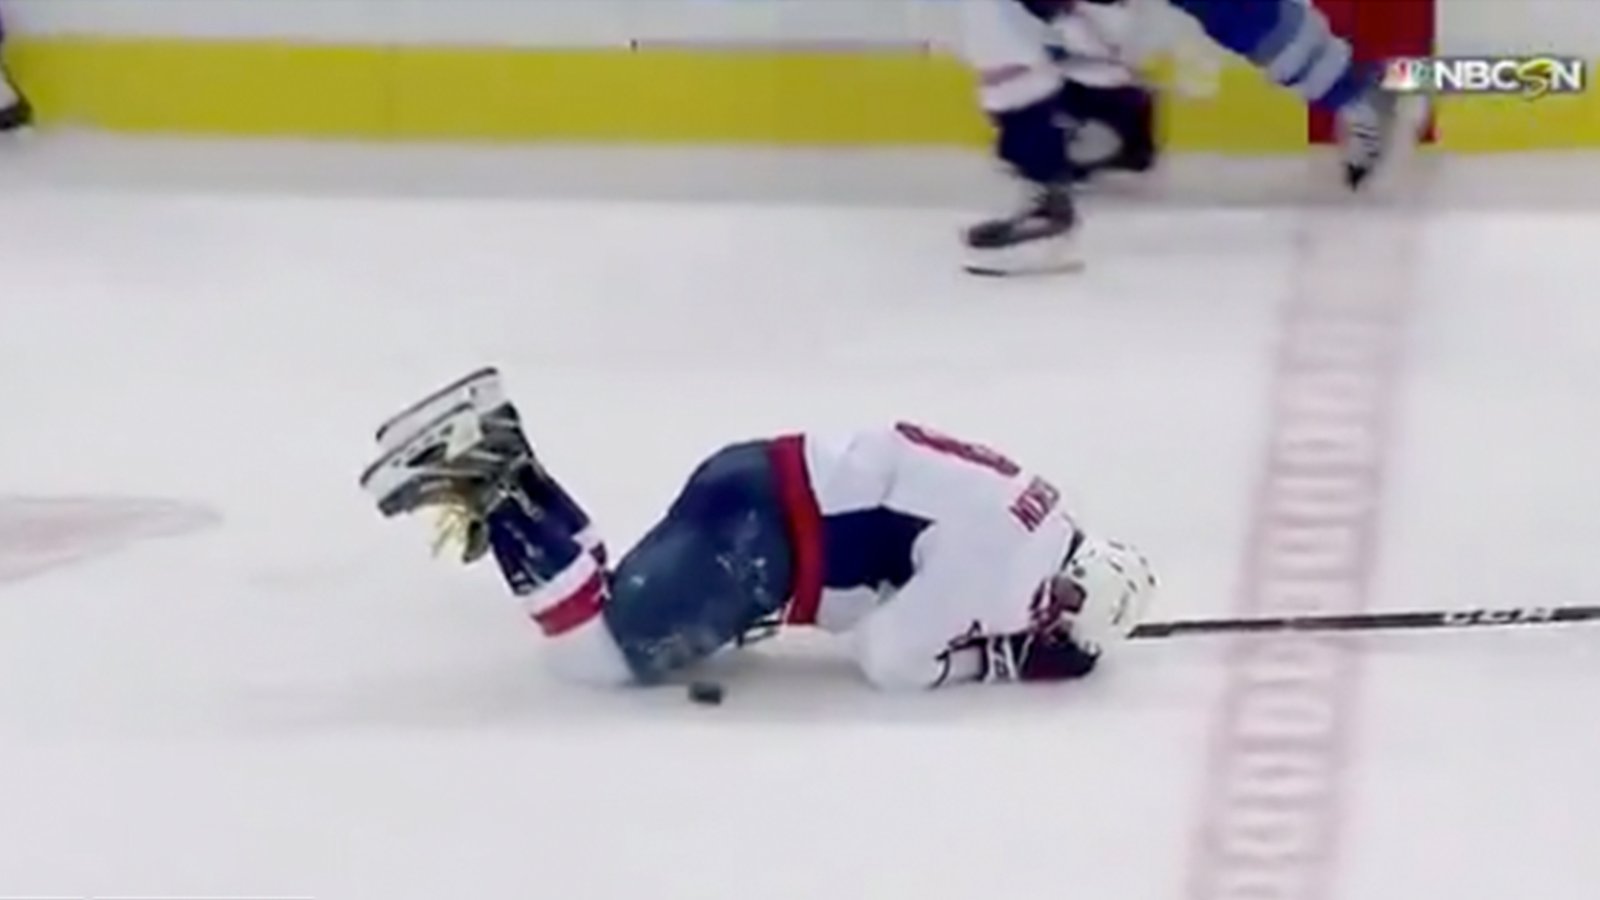 Ovechkin and Oshie collide, Ovechkin leaves game with suspected concussion